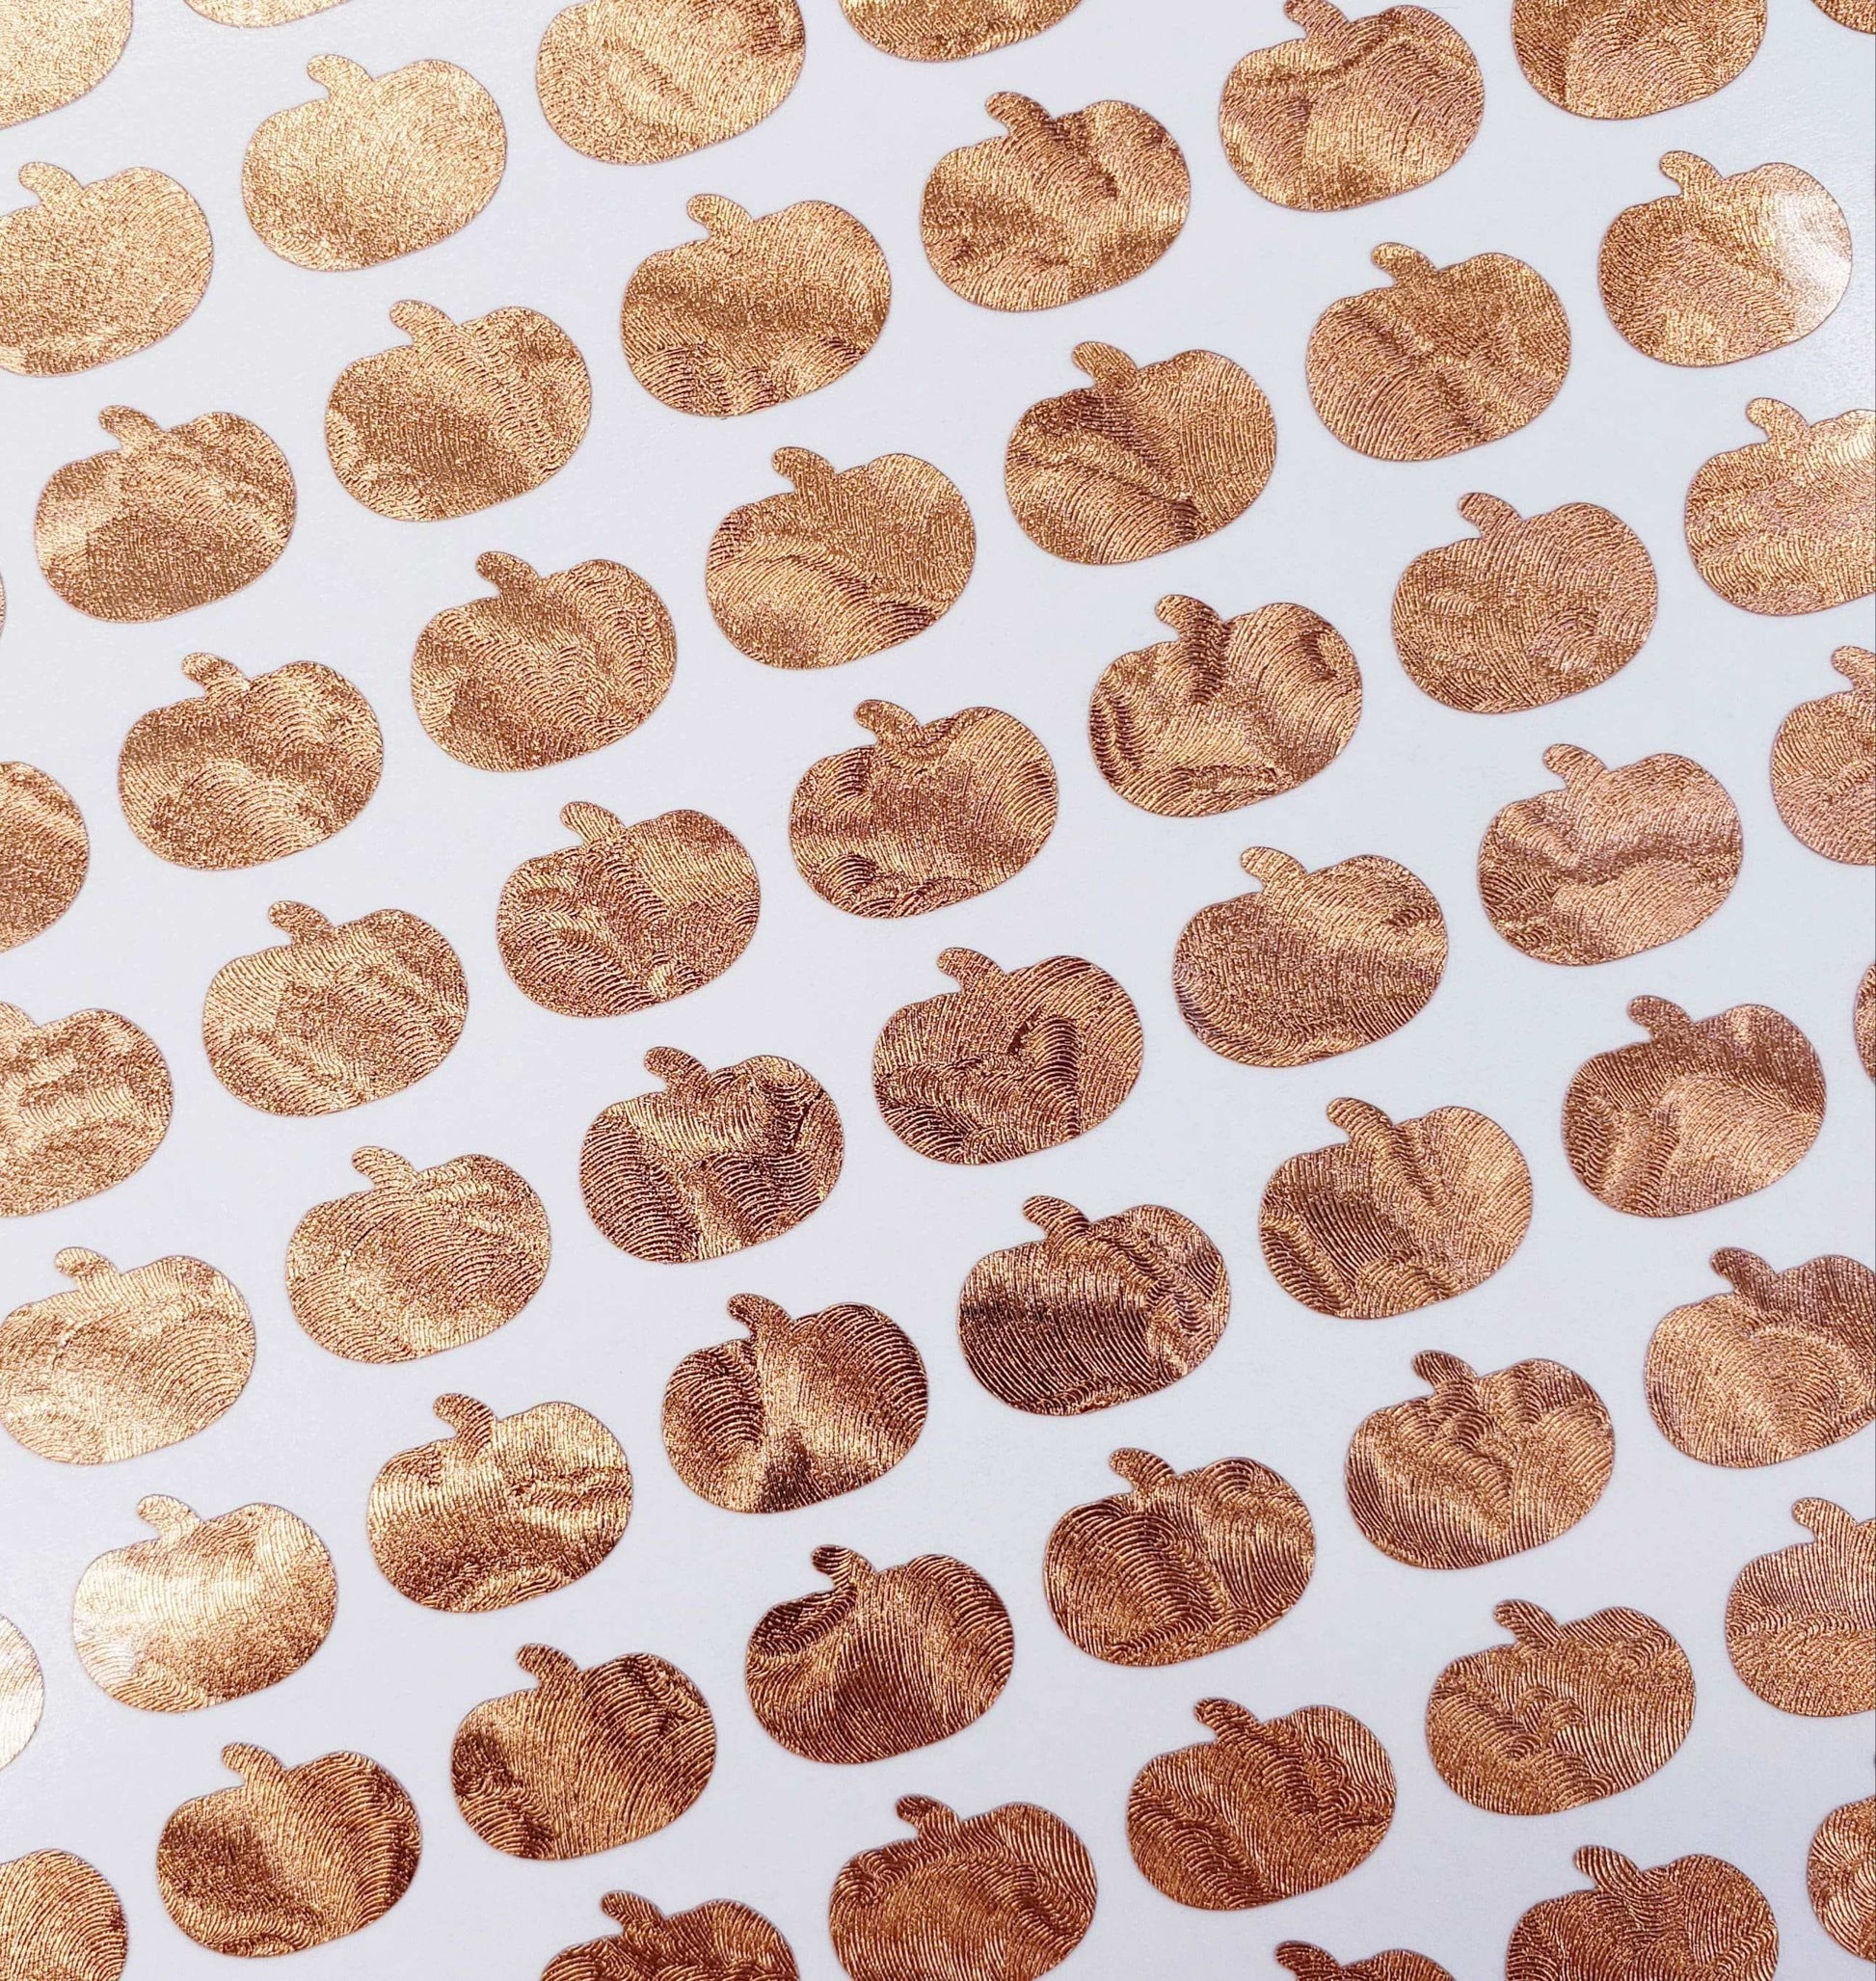 Copper Pumpkin Stickers, set of 100, 200 or 300 little rose gold pumpkin adhesive decals, Halloween and Fall season decorative stickers